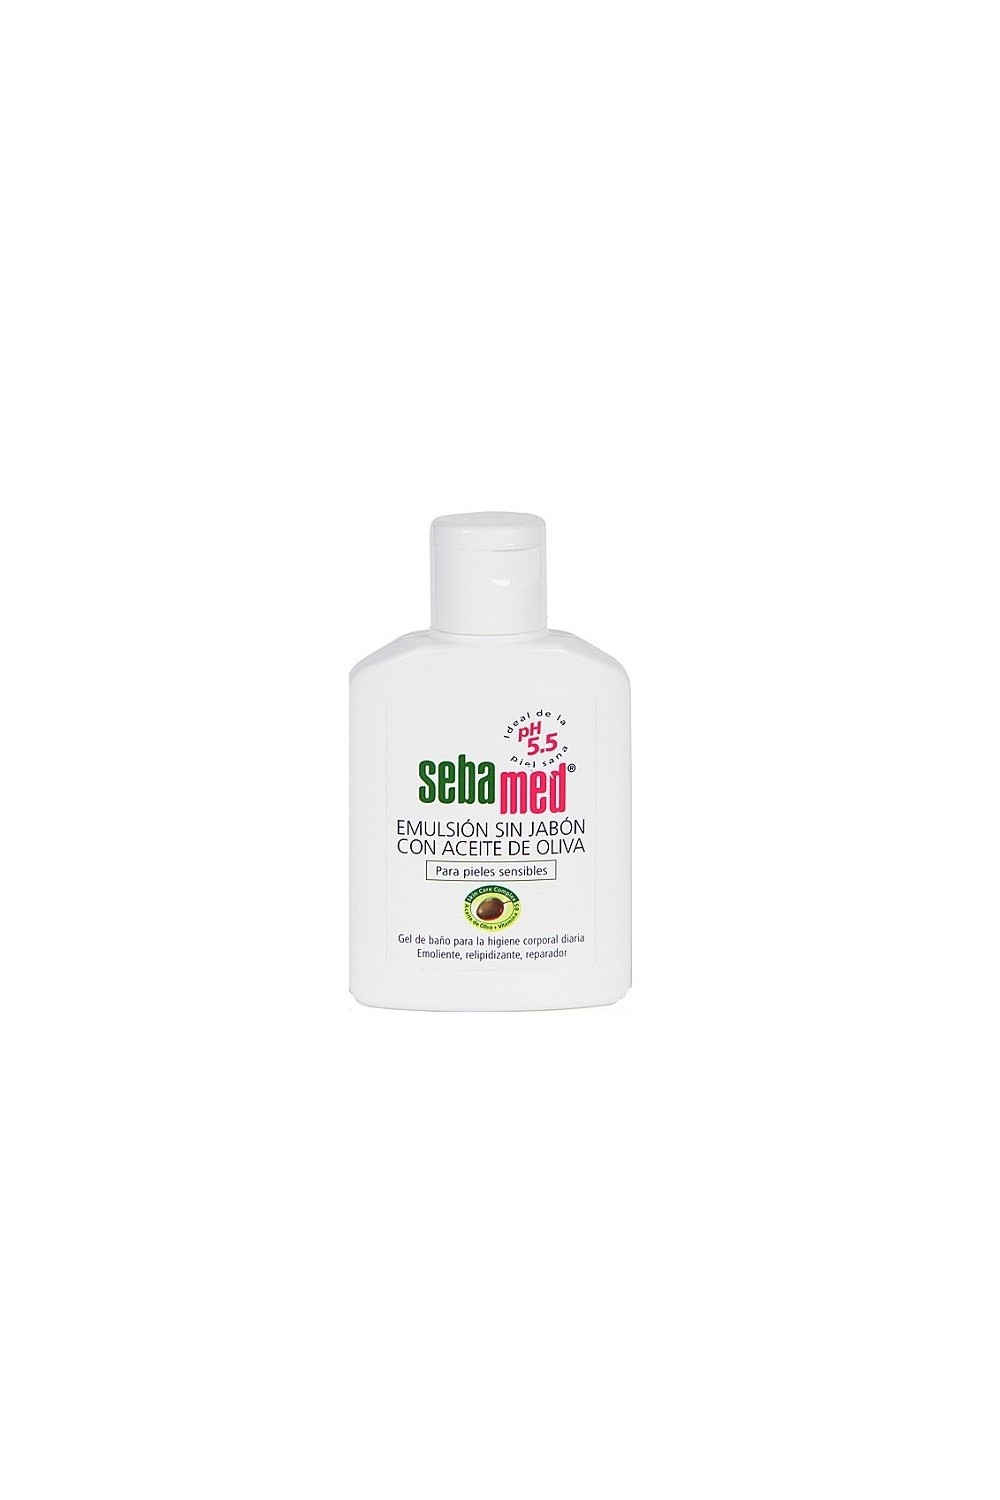 Sebamed Olive Liquid Face and Body Wash 200ml